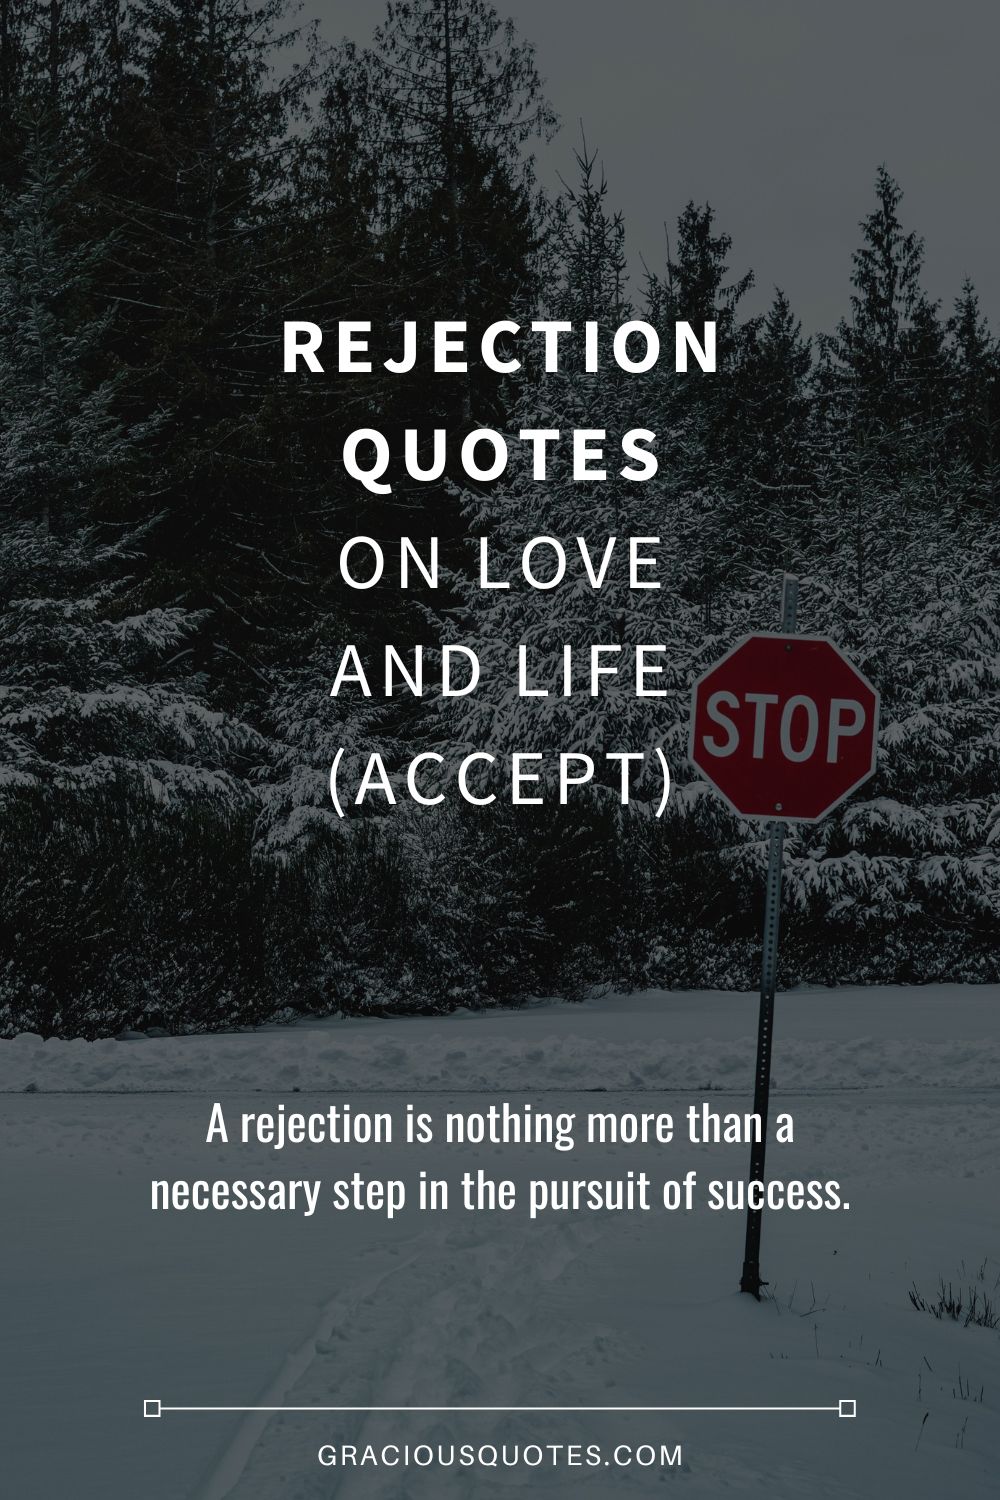 Rejection Quotes on Love and Life ACCEPT Gracious Quotes